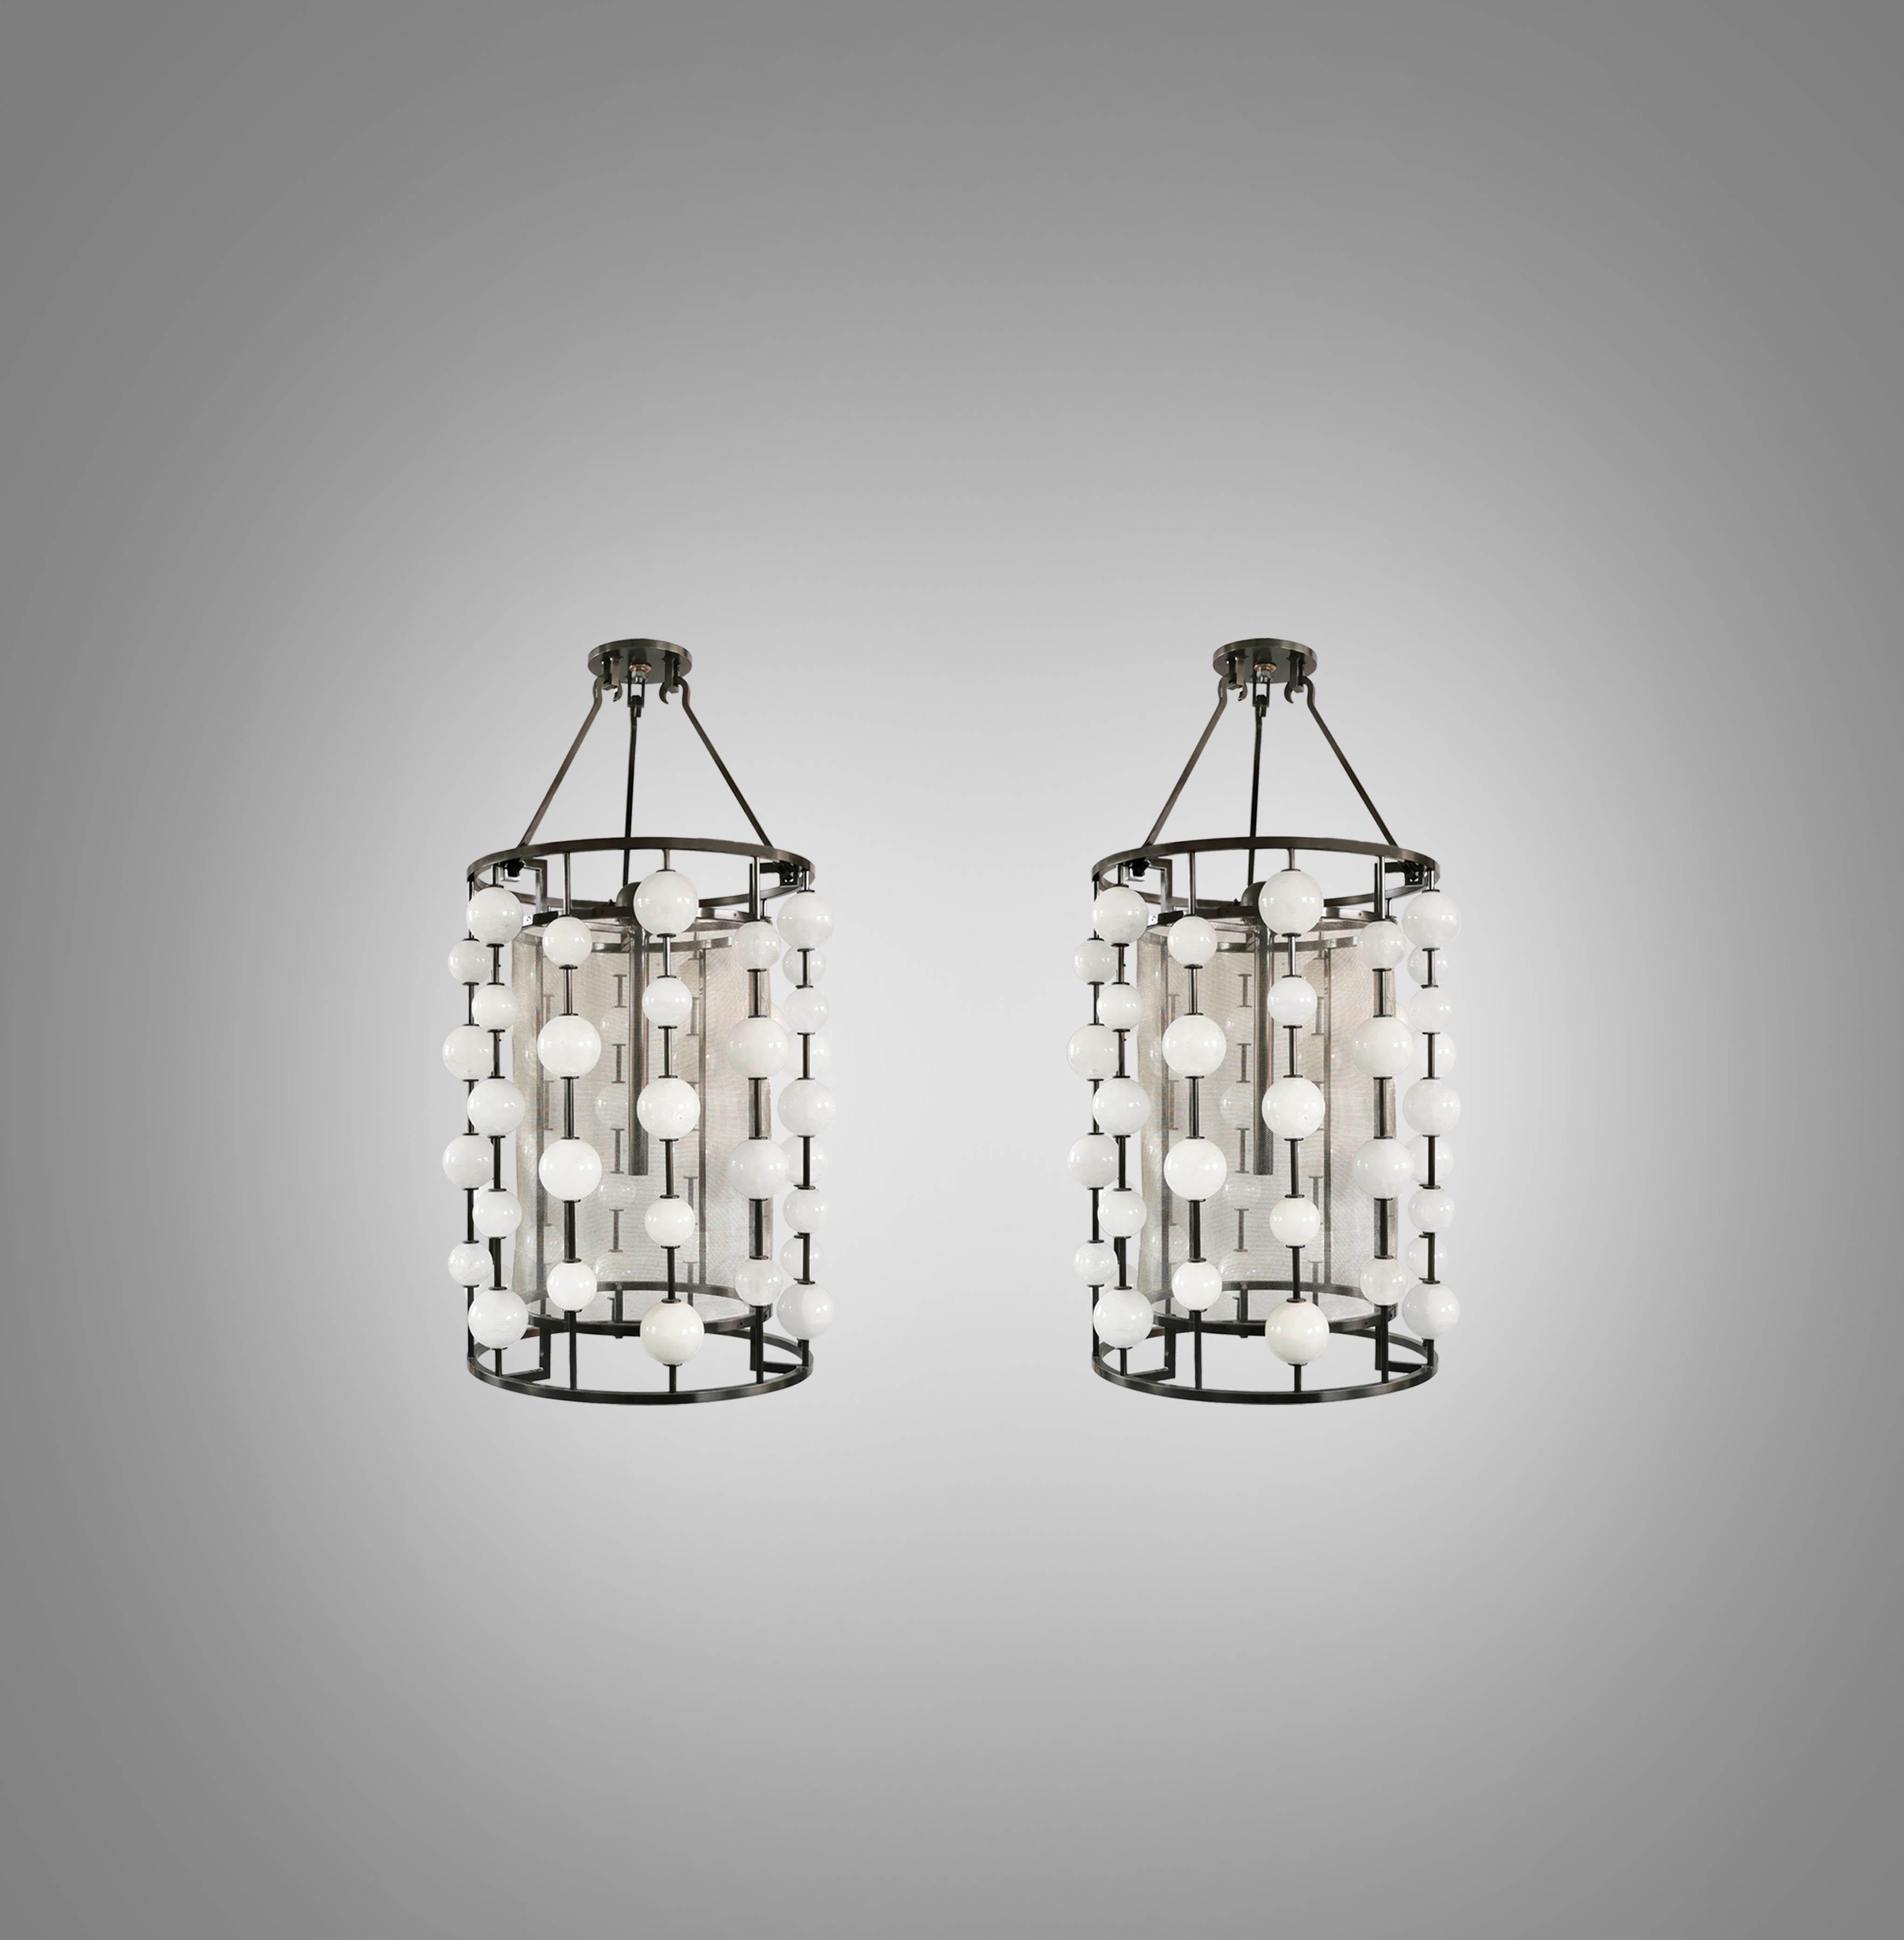 Pair of rock crystal bubble pendant lights with antique brass frames. Created by Phoenix Gallery, NYC.
Two sockets installed. E26 base light bulbs. 80w long tube lightbulb. 160w total.
Height can be adjustable.